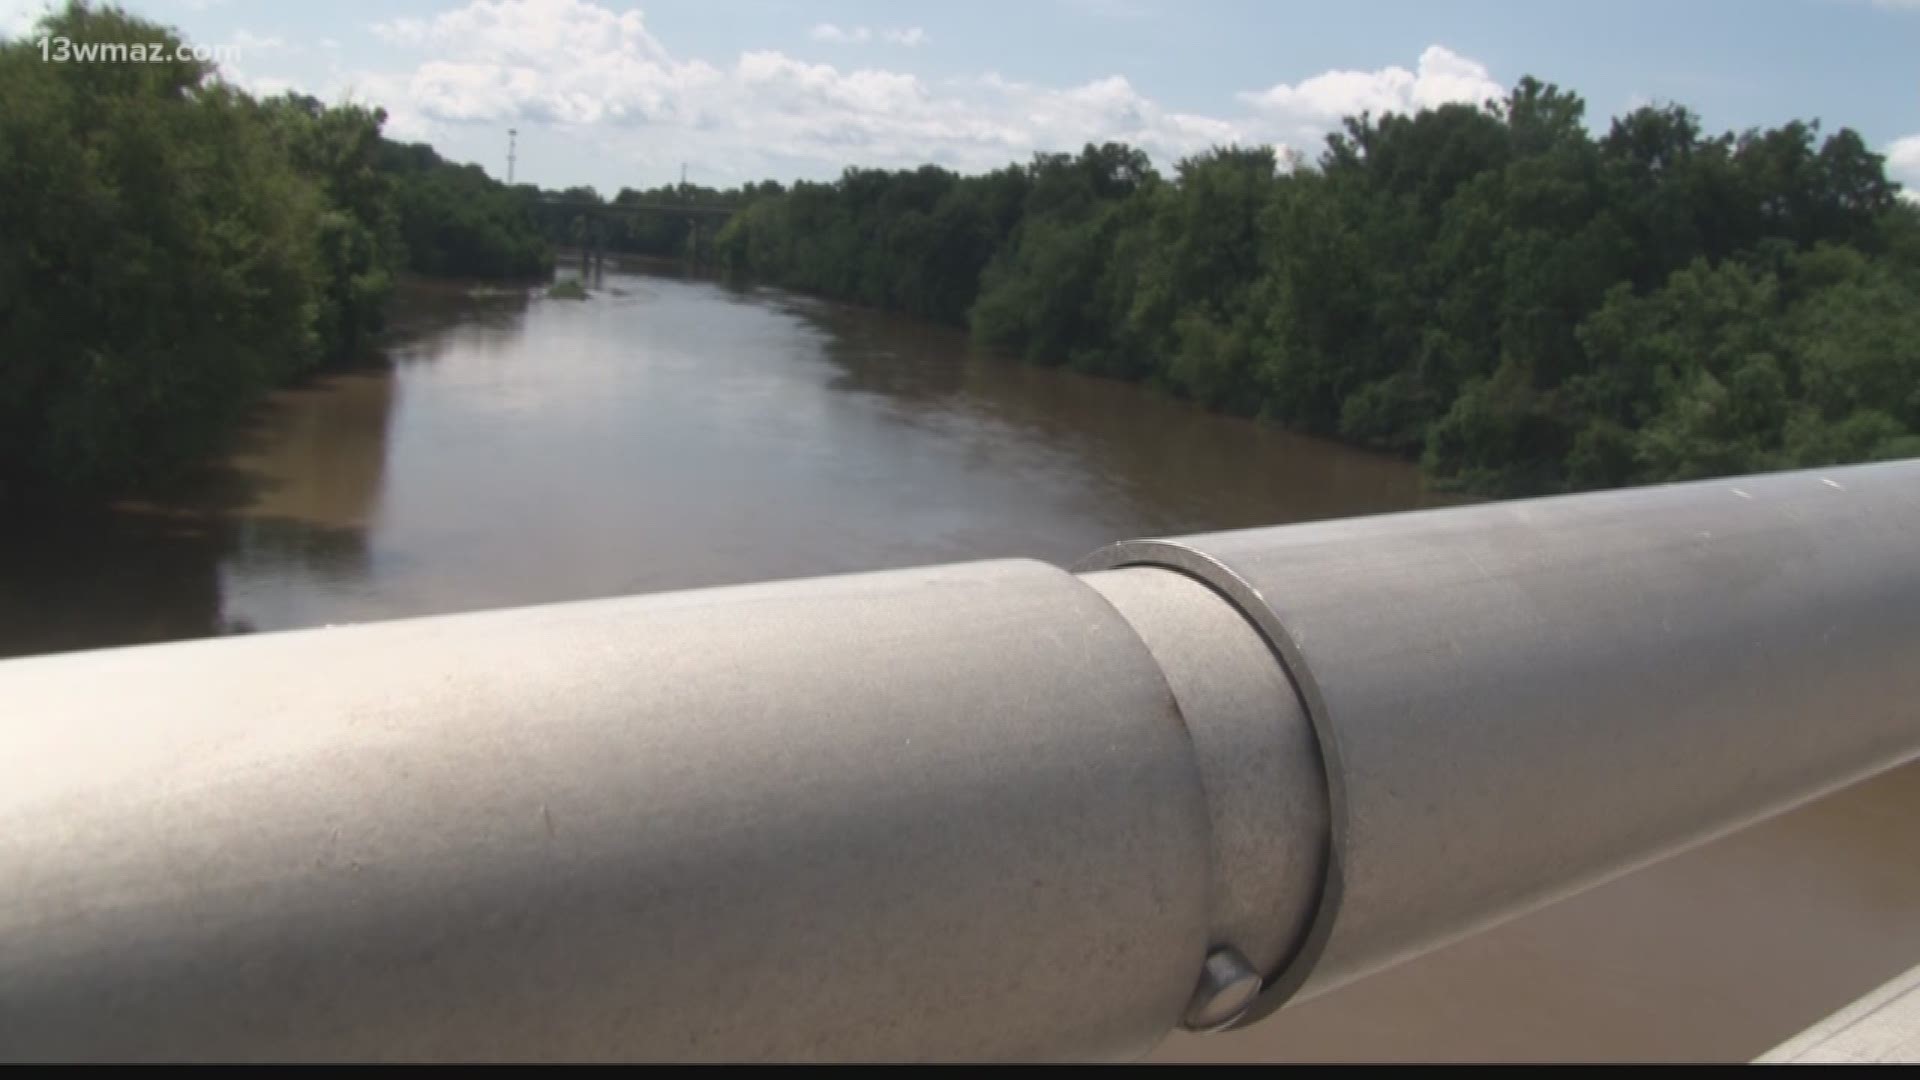 Sewage spill impacting Ocmulgee River